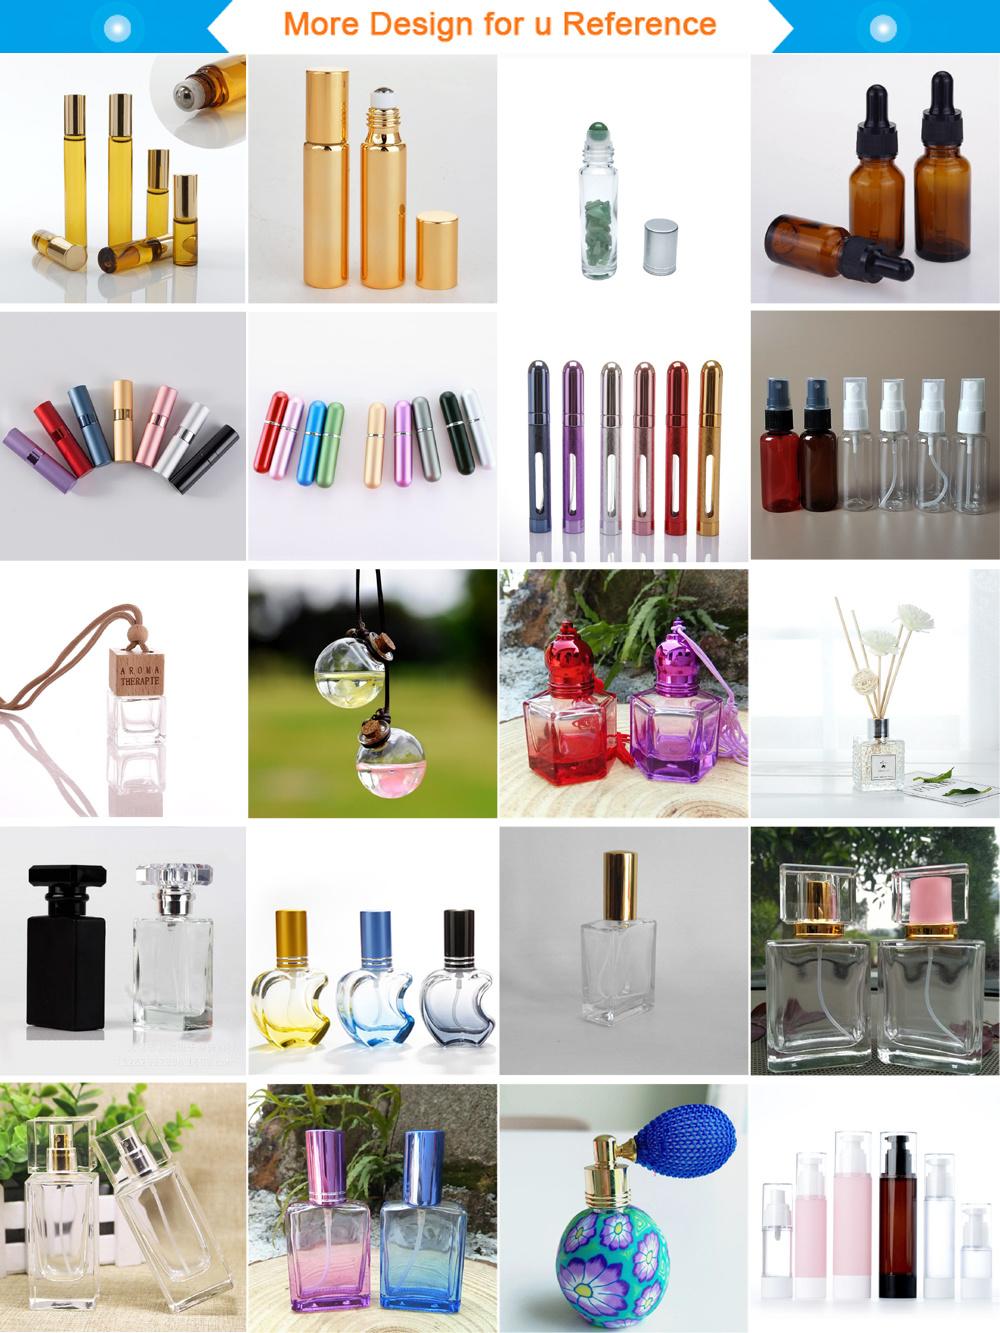 5ml Mini Portable for Travel Aluminum Refillable Perfume Bottle with Spray Empty Cosmetic Containers with Atomizer Hot Sale